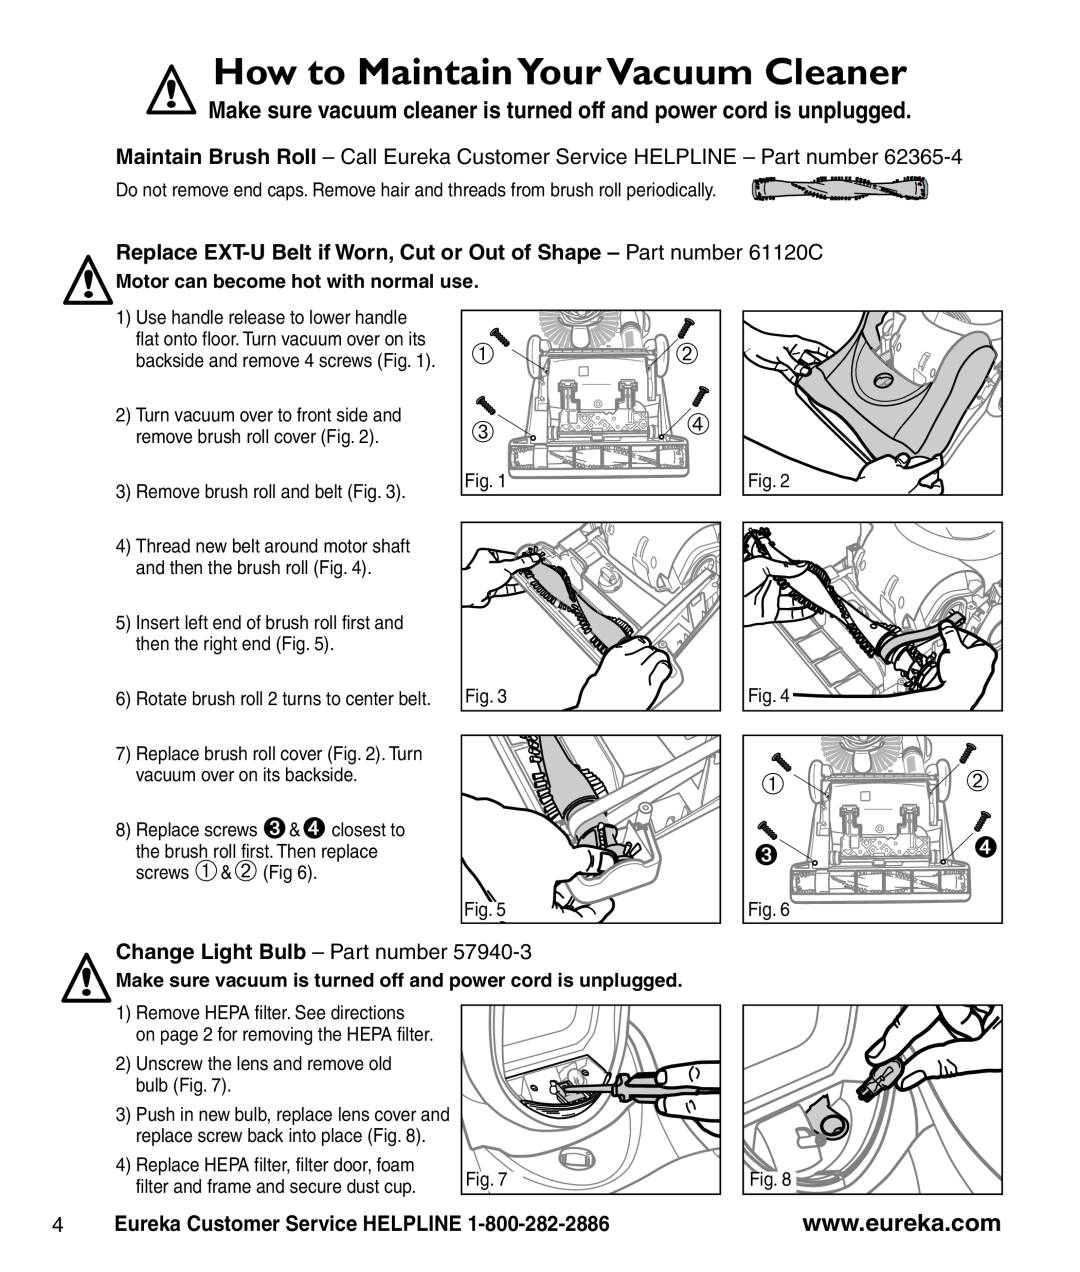 Eureka 8800-8849 Series manual How to Maintain YourVacuum Cleaner, Change Light Bulb - Part number 